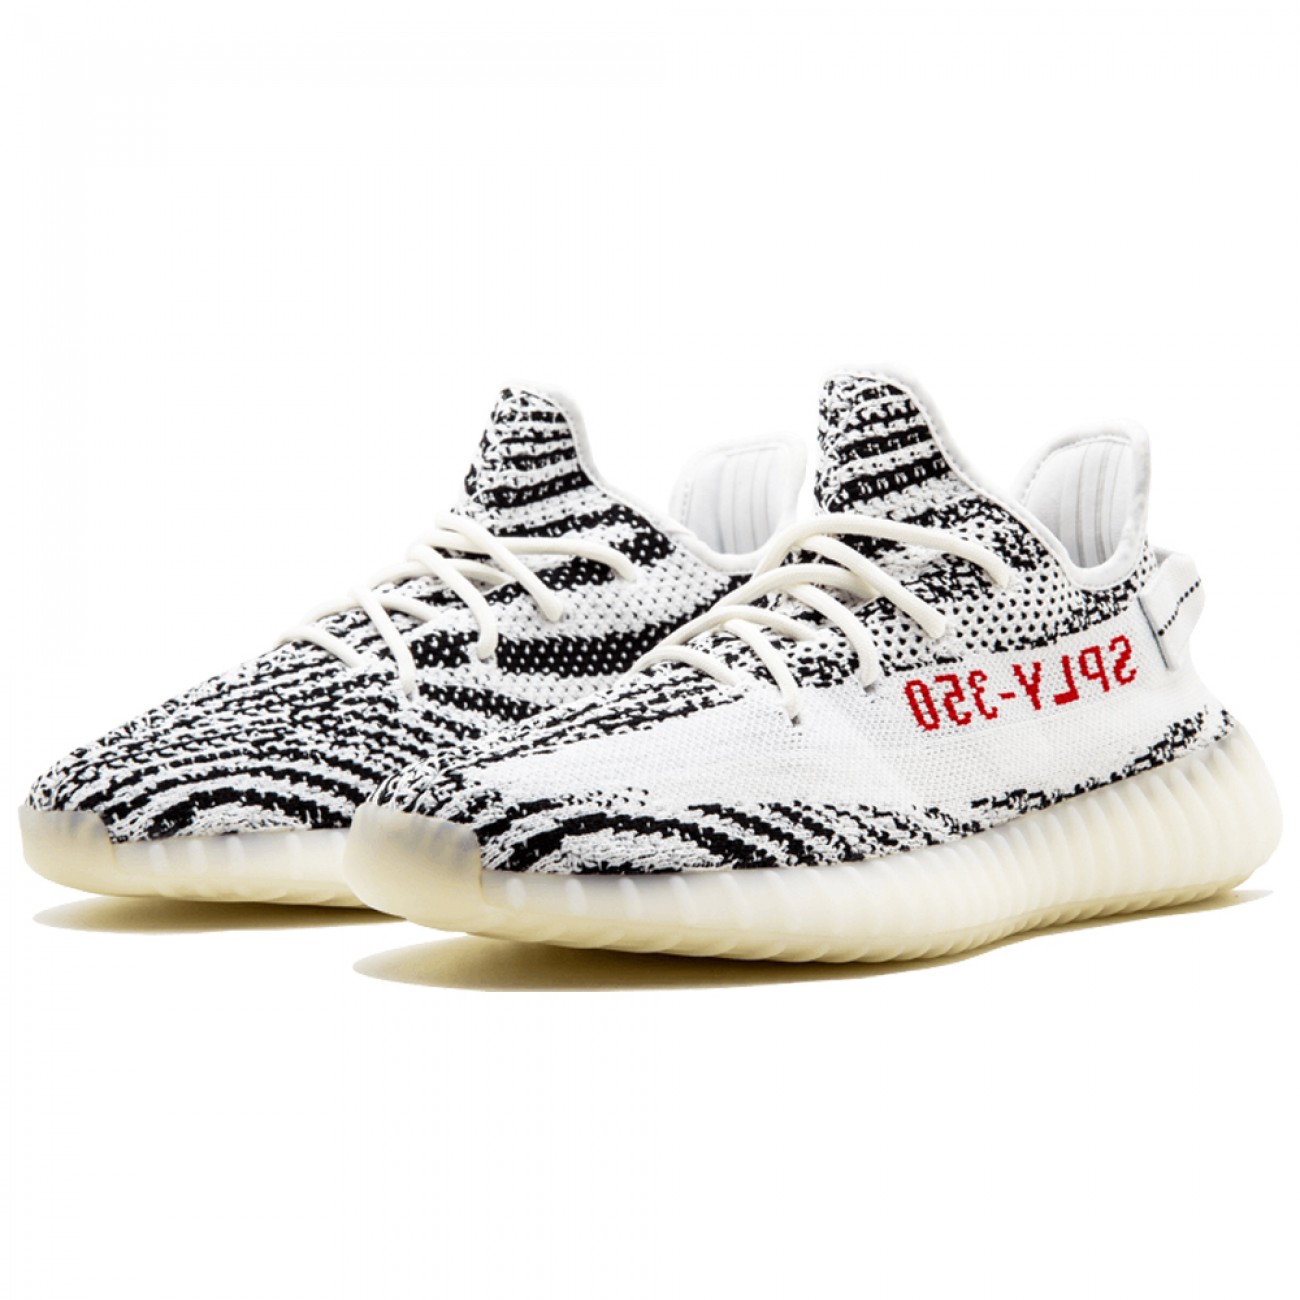 Adidas Yeezy Boost 350 V2 Zebra Cp9654 Outfit 2018 Release Date (3) - newkick.org